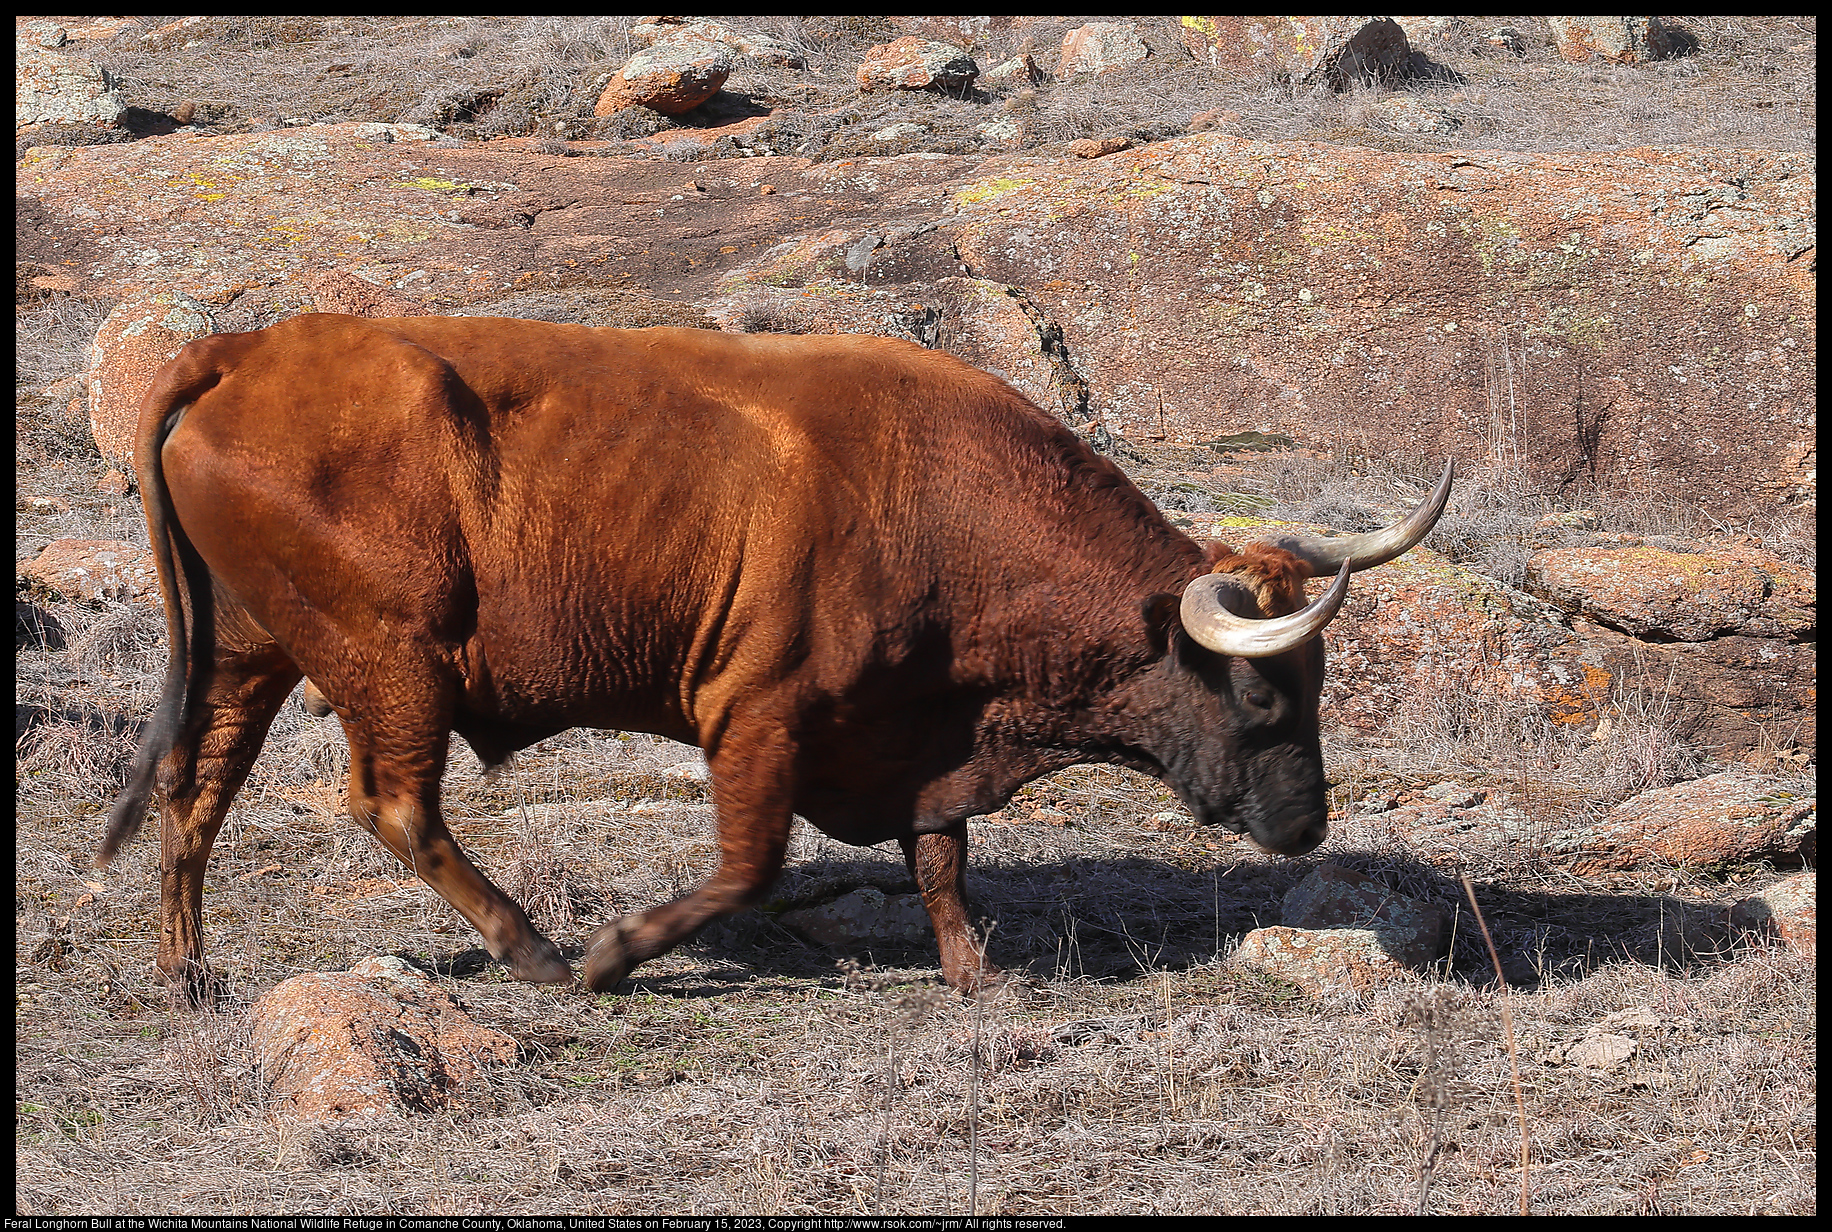 Feral Longhorn Bull at the Wichita Mountains National Wildlife Refuge in Comanche County, Oklahoma, United States on February 15, 2023